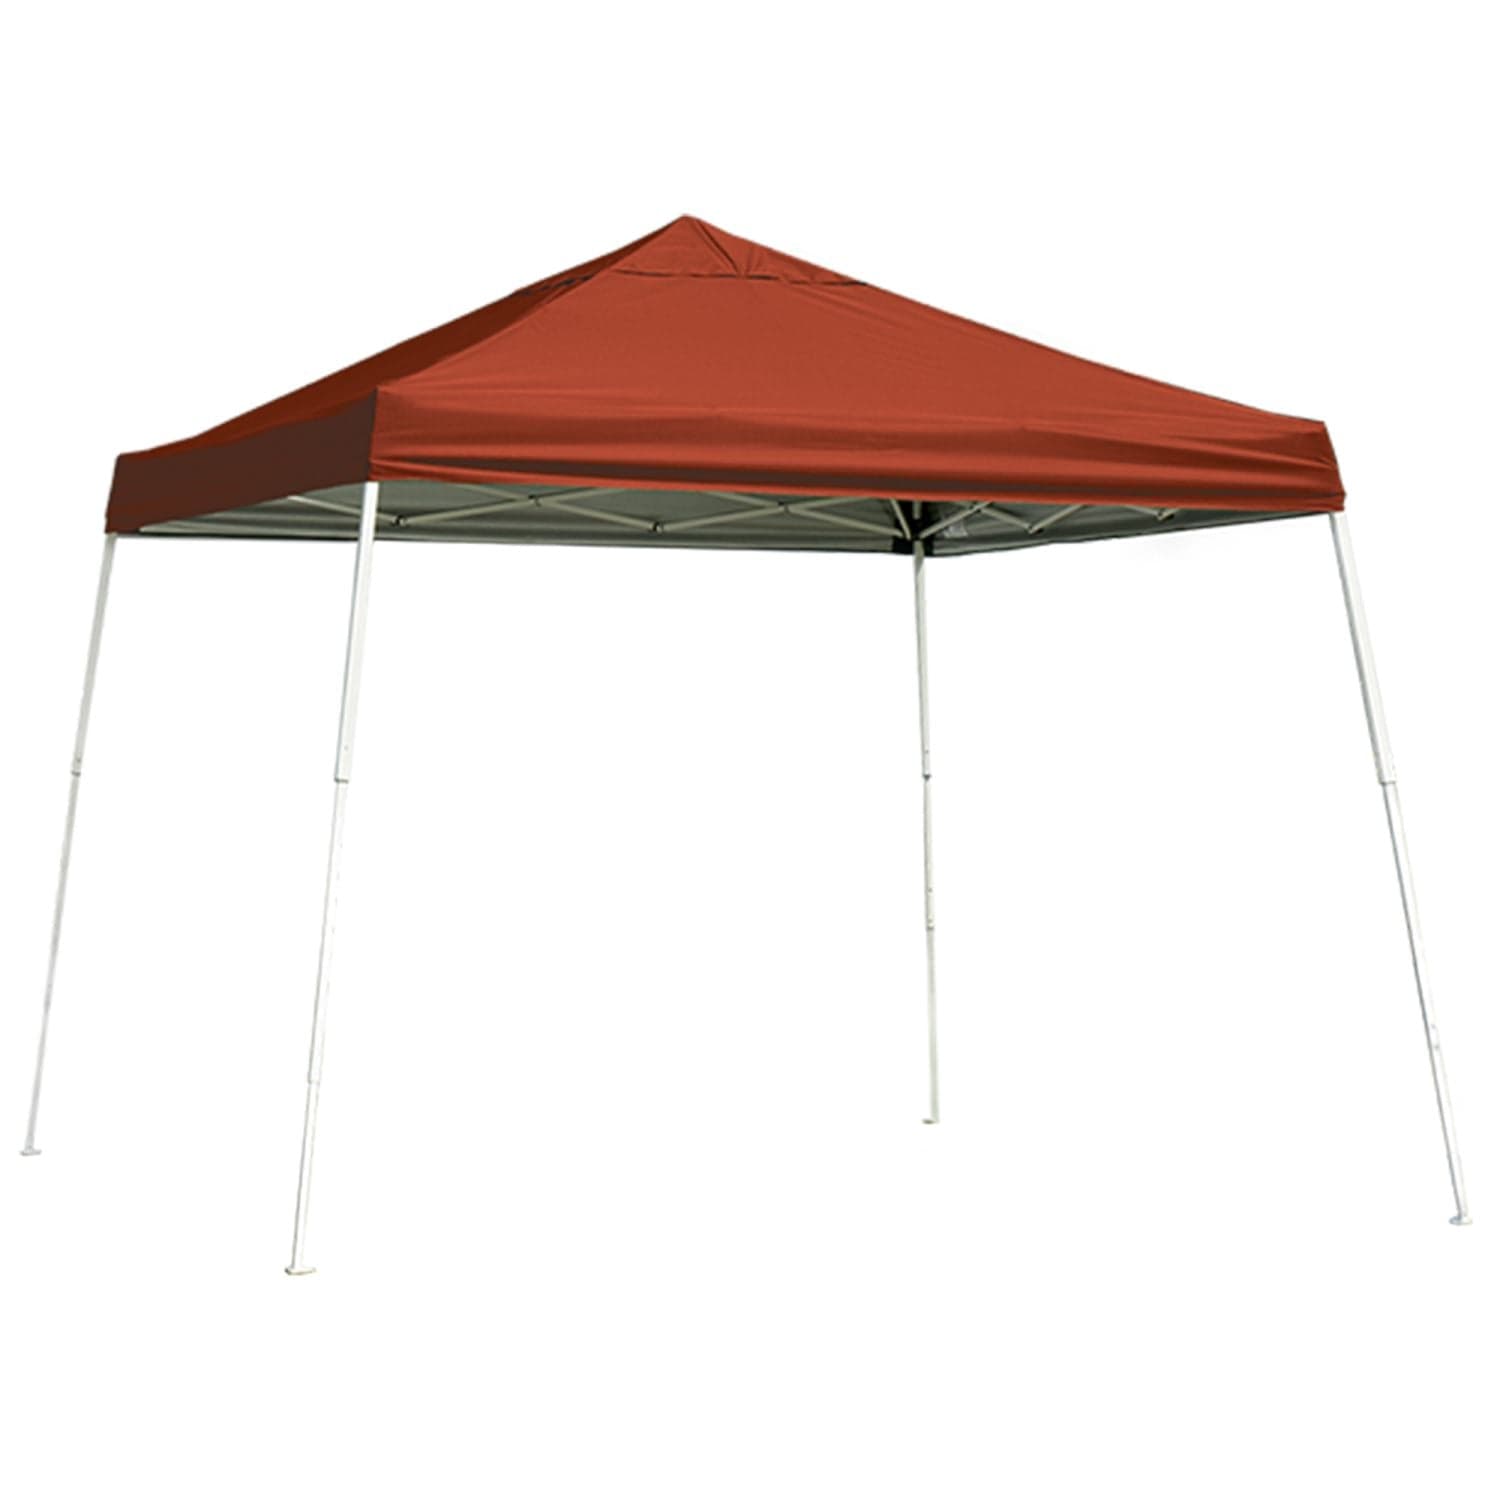 The Fulfiller Pop-Up Canopies ShelterLogic | Pop-Up Canopy HD - Slant Leg 12 x 12 ft. Red 22545